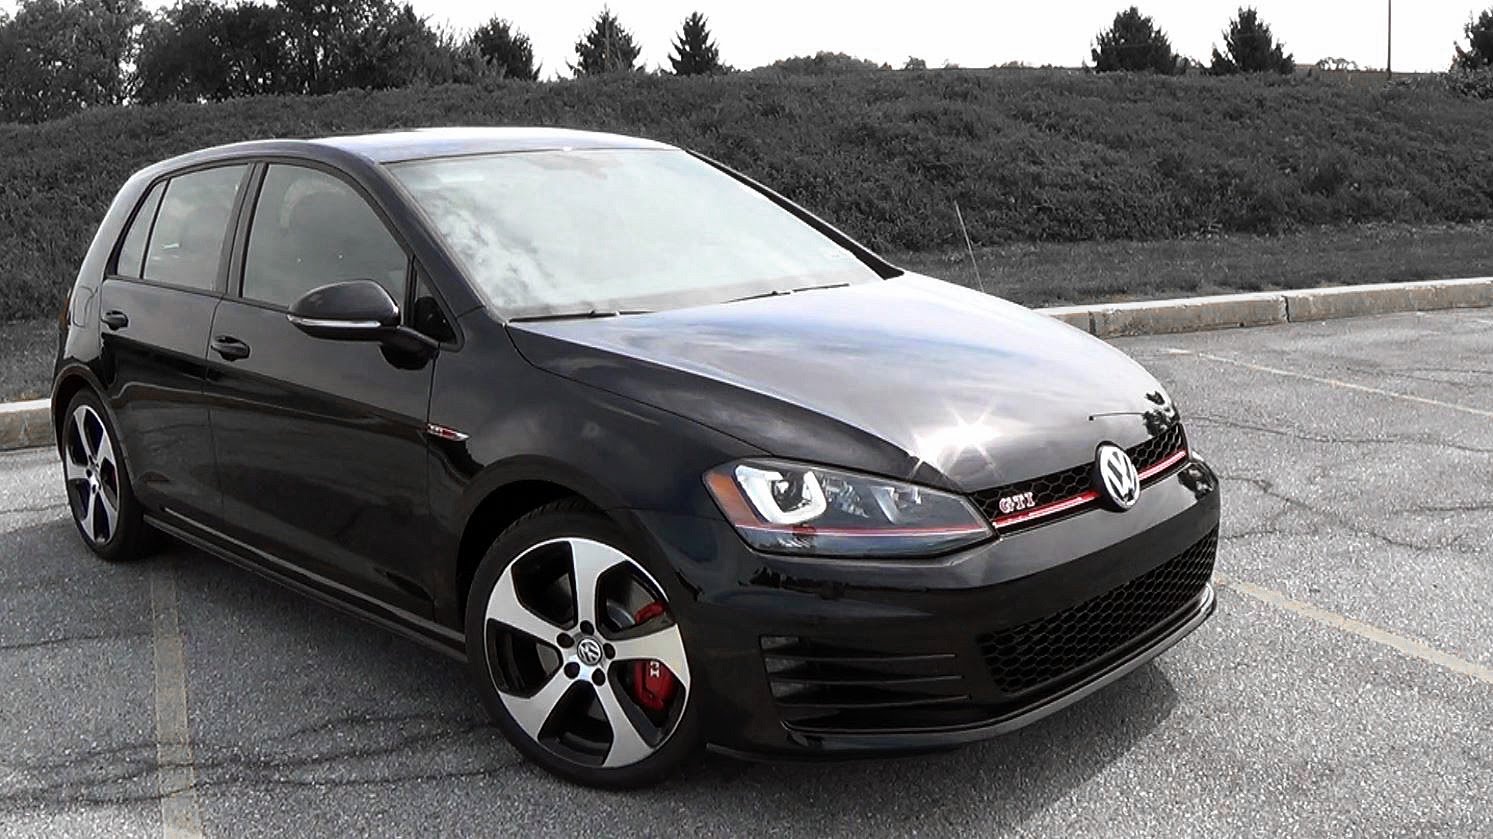 Volkswagen Golf GTI Backgrounds, Compatible - PC, Mobile, Gadgets| 1493x839 px